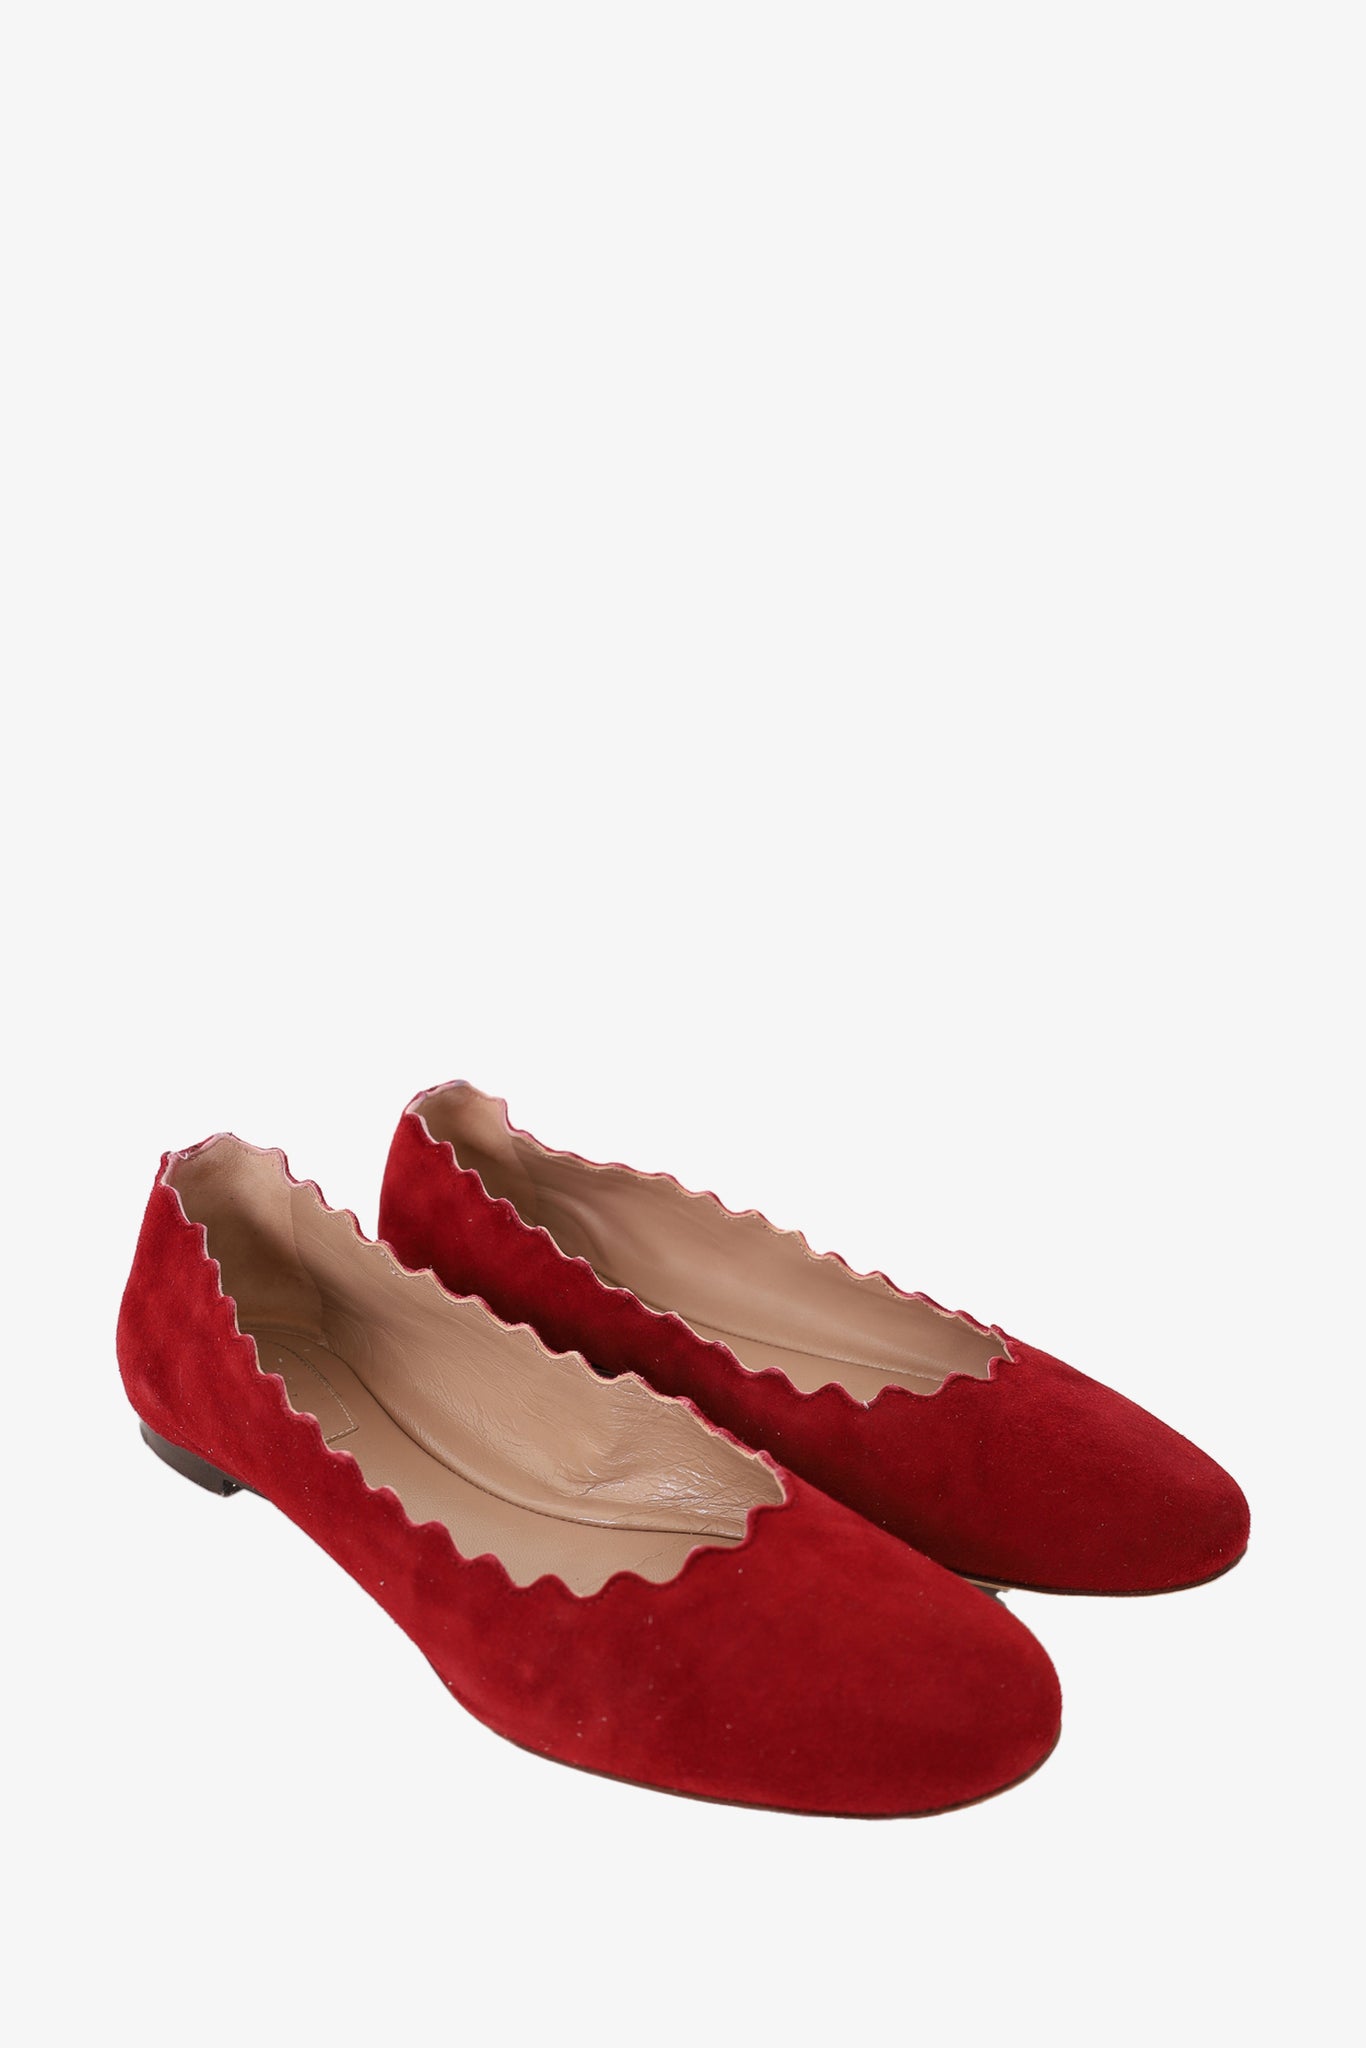 Chloe Red Suede Scalloped Flats Size 36.5